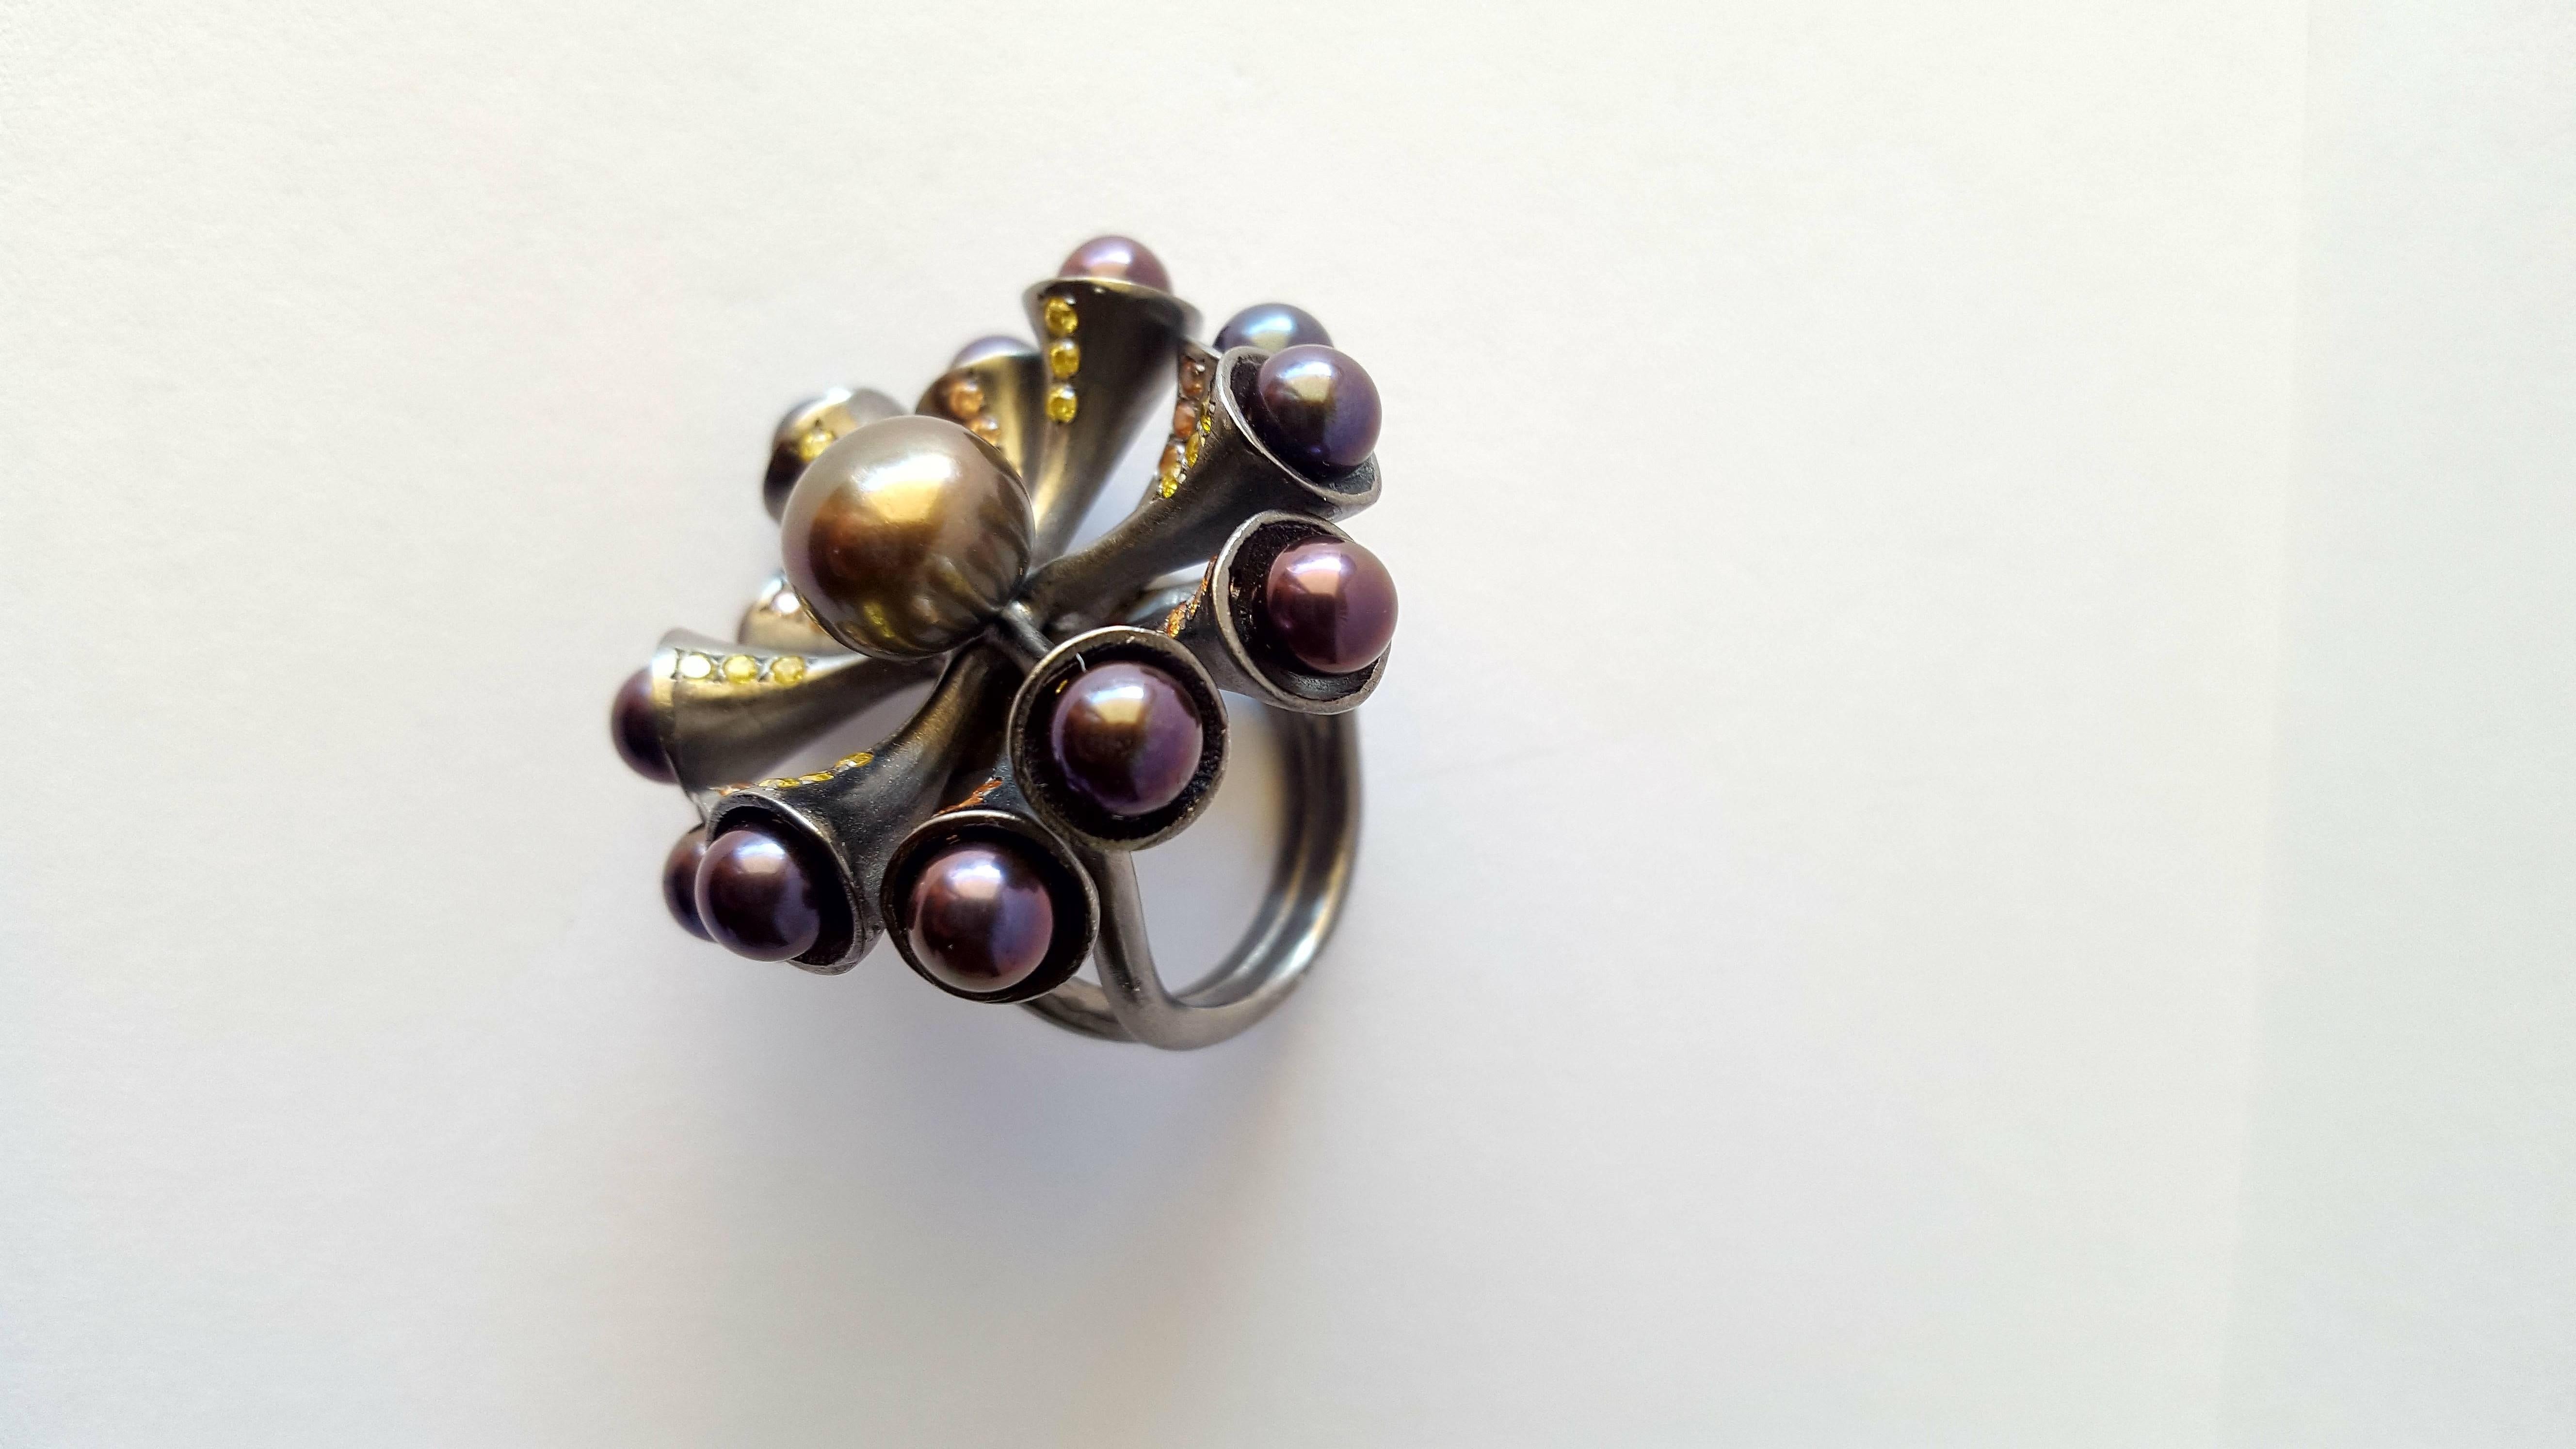 Statement ,black Rhodium plated, sterling silver ring with fresh water pearls , yellow and orange Zircons. Eye catching and dramatic this ring will transform any outfit. Fashionable, comfortable and easy to wear despite its size. The design is